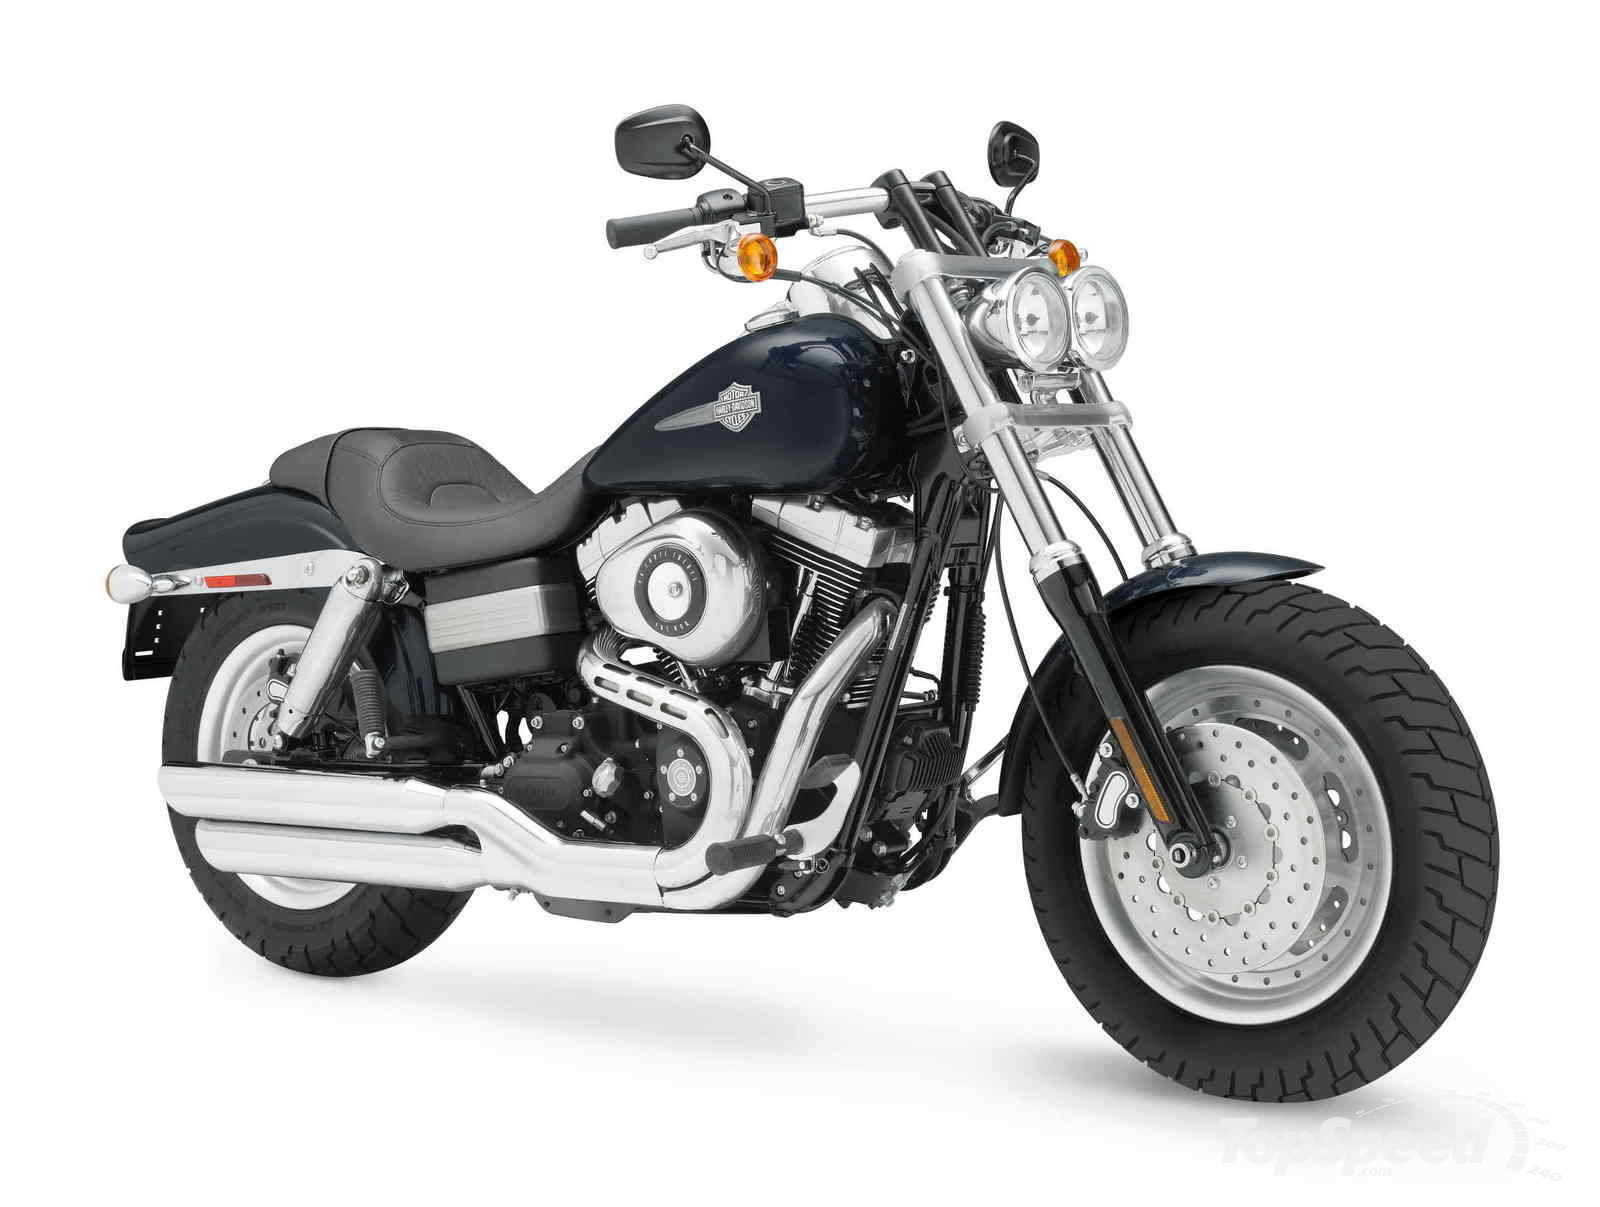 black and blue motorcycle HARLEY DAVIDSON FAT BOB TO BE RELEASED IN INDIA